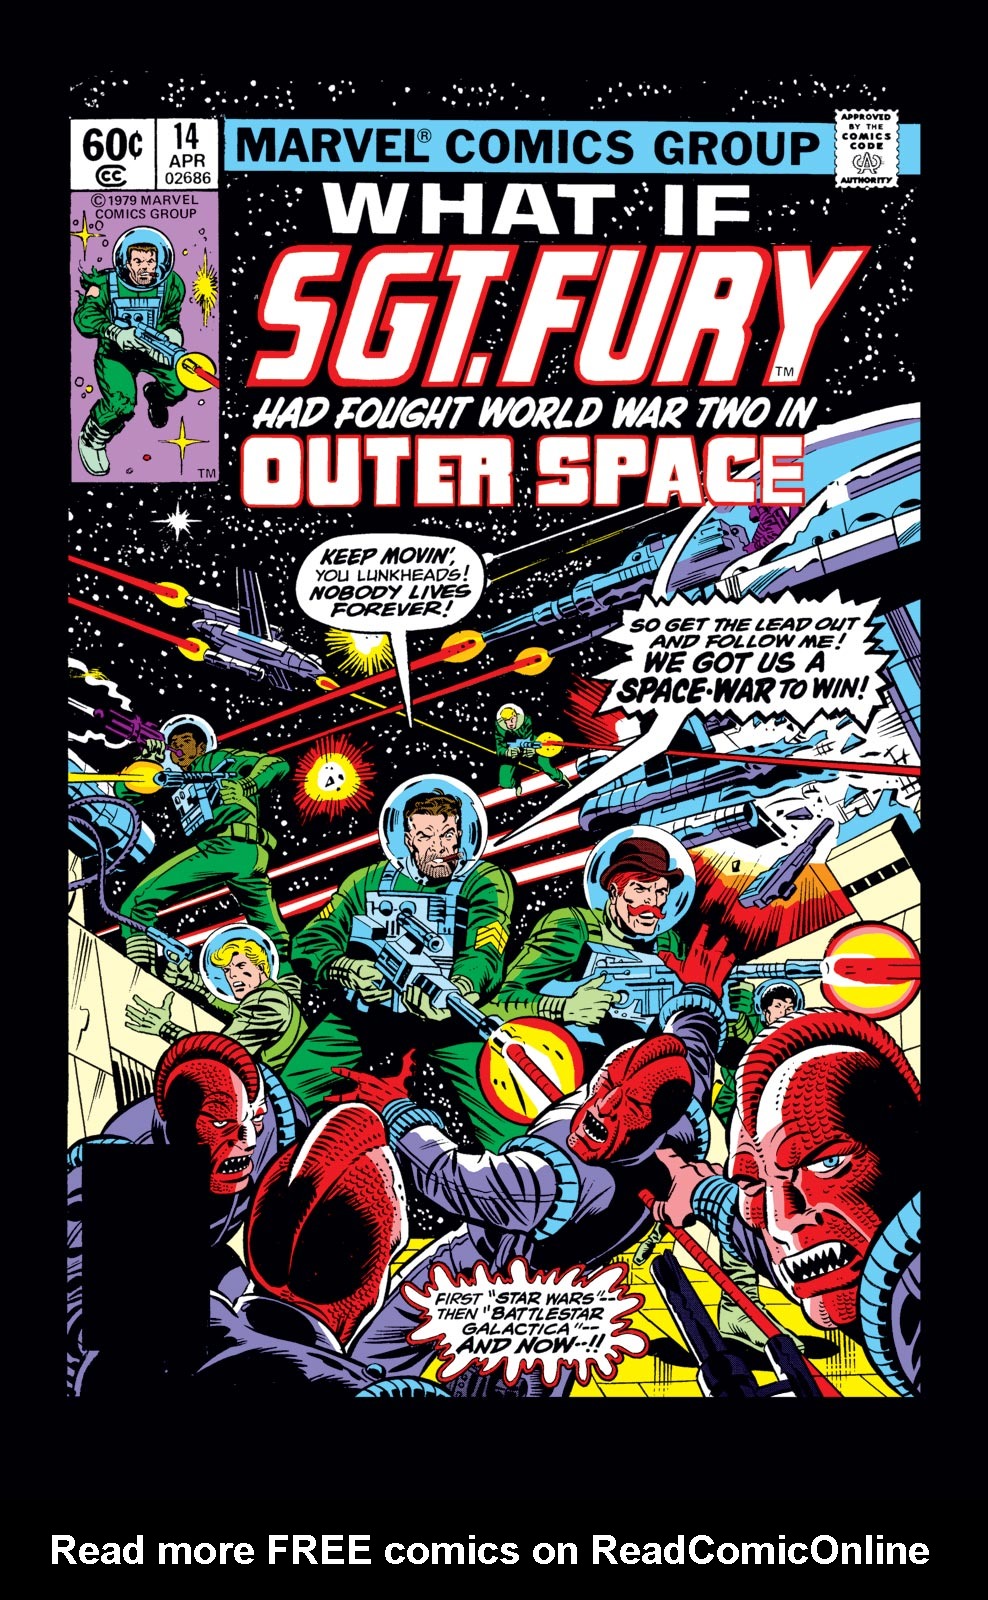 What If? (1977) Issue #14 - Sgt. Fury had Fought WWII in Outer Space #14 - English 1